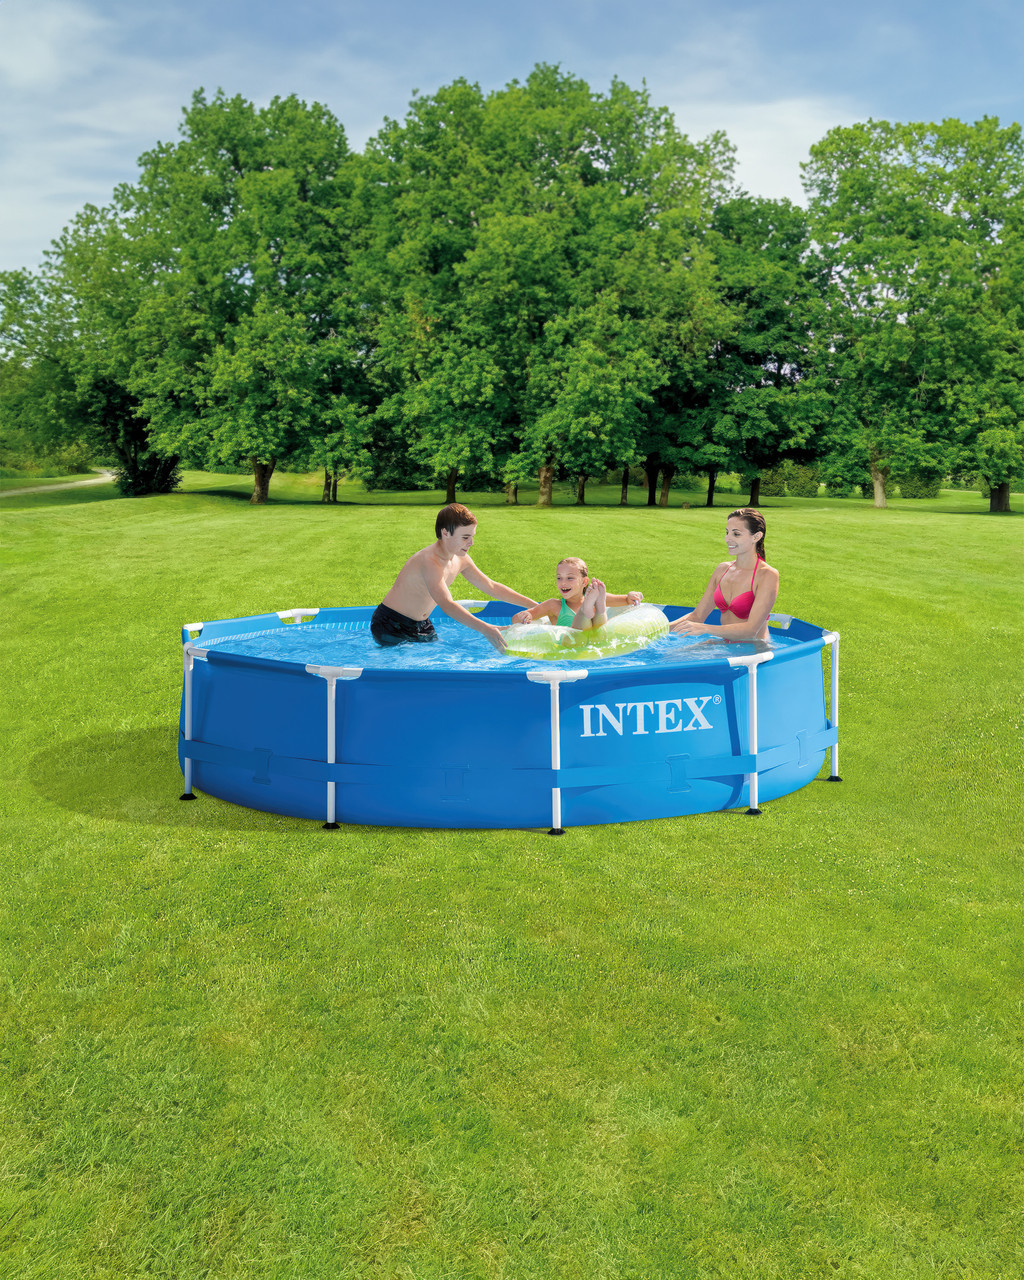 Intex 10-ft x 10-ft x 30-in Metal Frame Round Above-Ground Pool